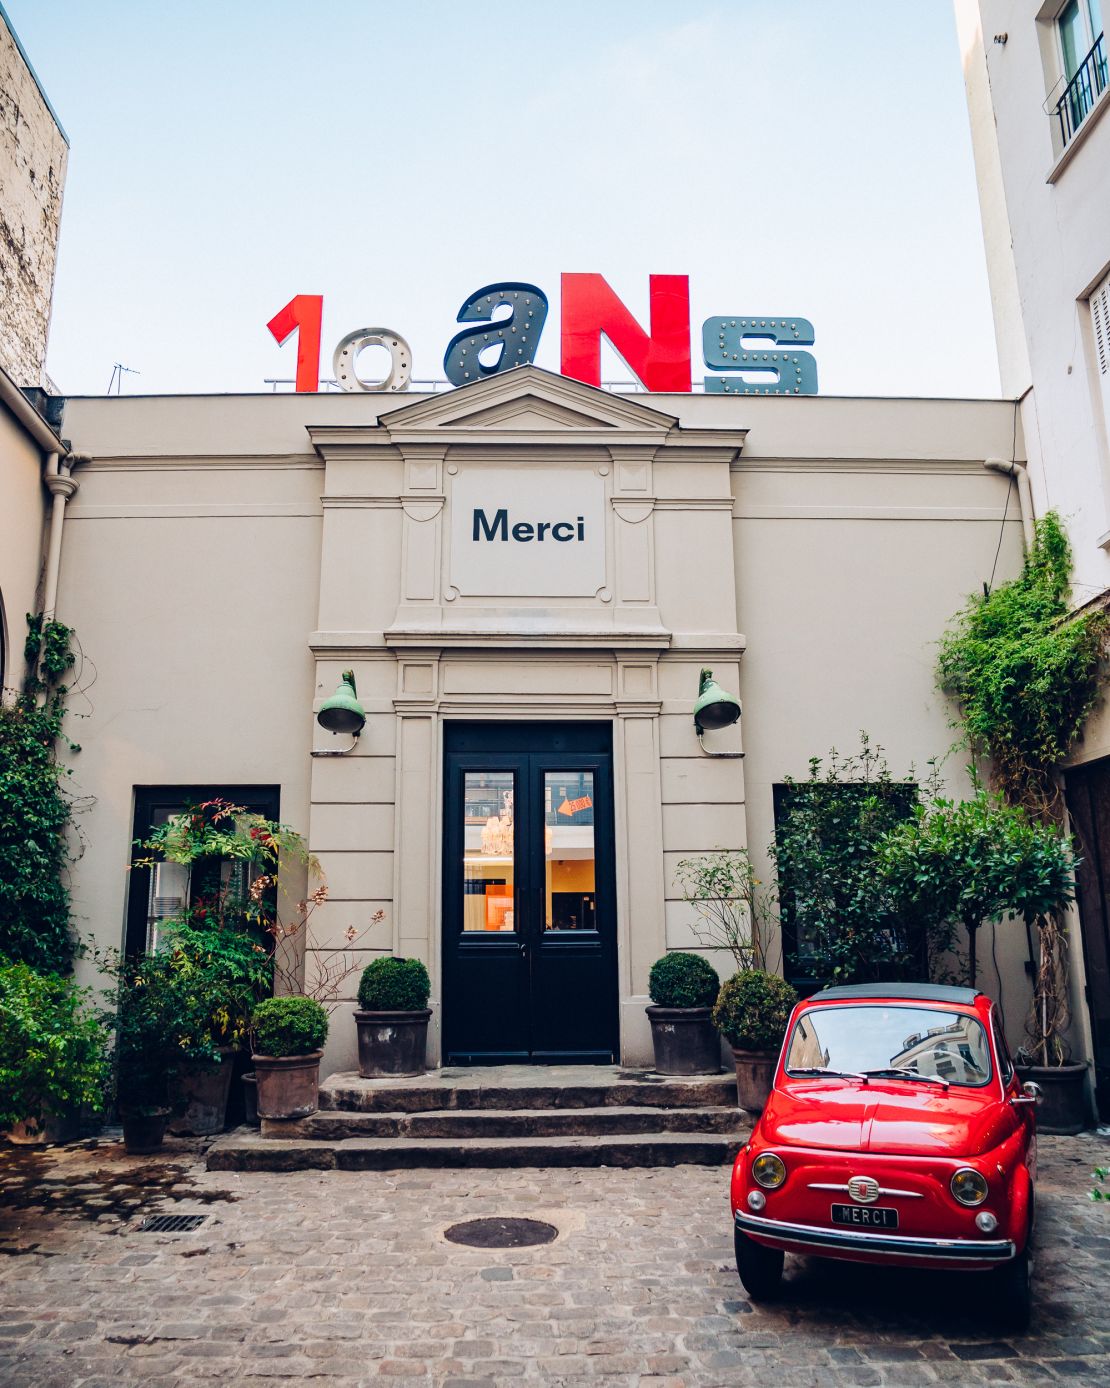 A visit to the cool Le Marais district in Paris won't be complete without a stop at the concept store Merci, which also houses a "used book cafe" and a cantina.